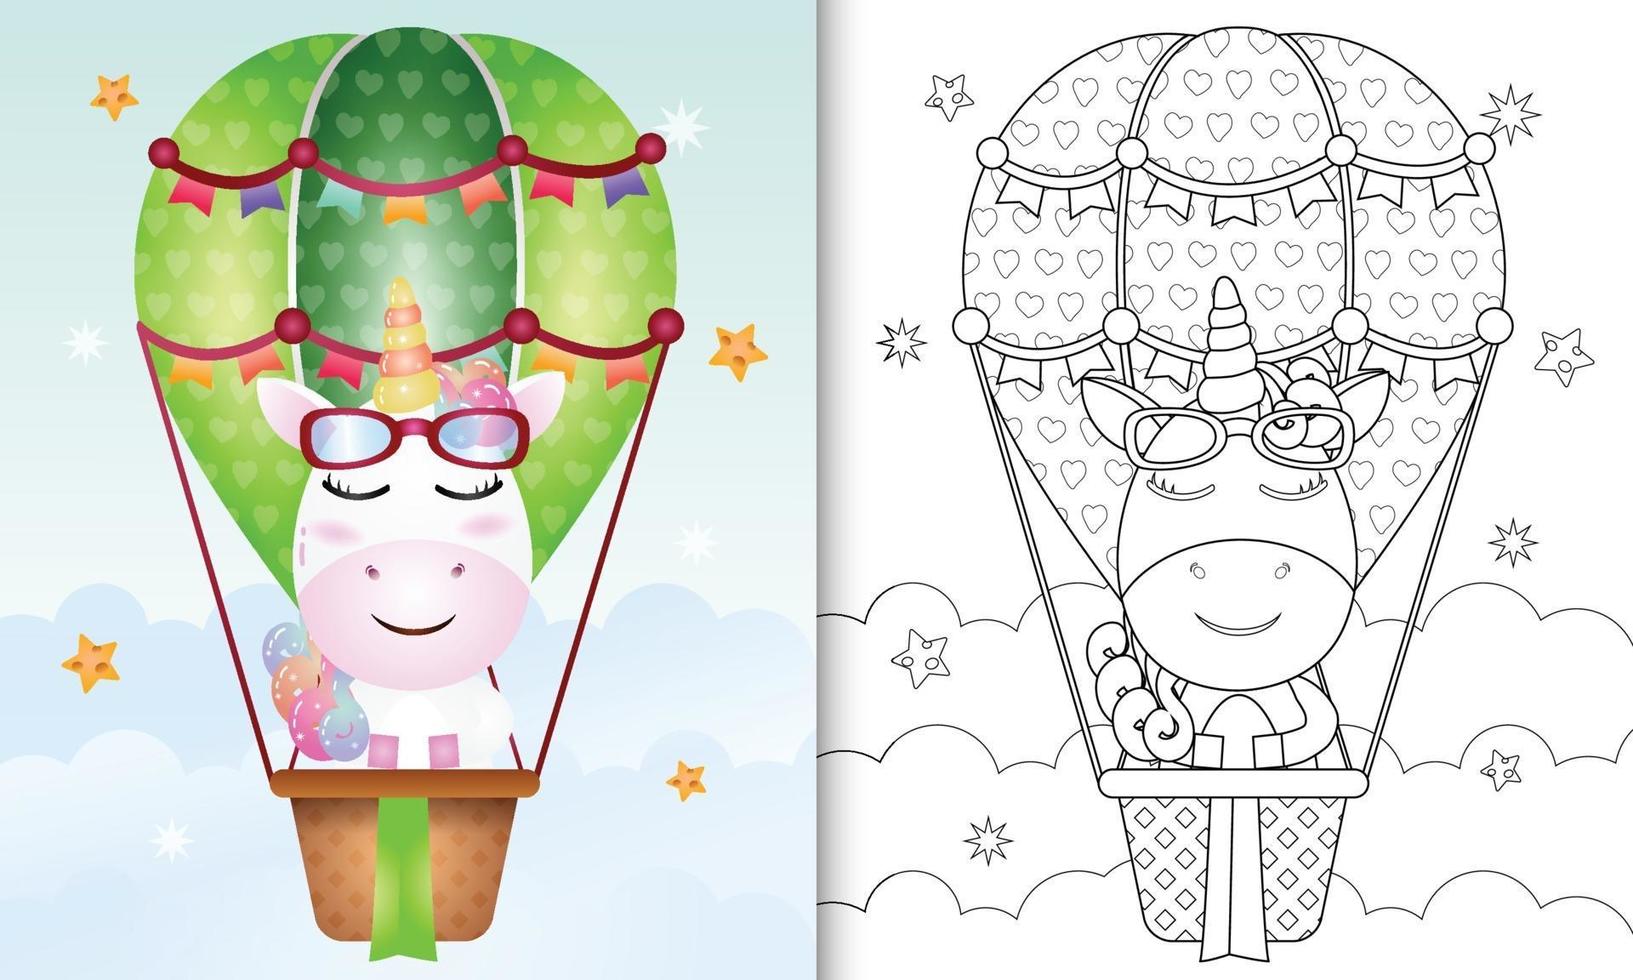 Coloring book template for kids with a cute unicorn on hot air balloon vector